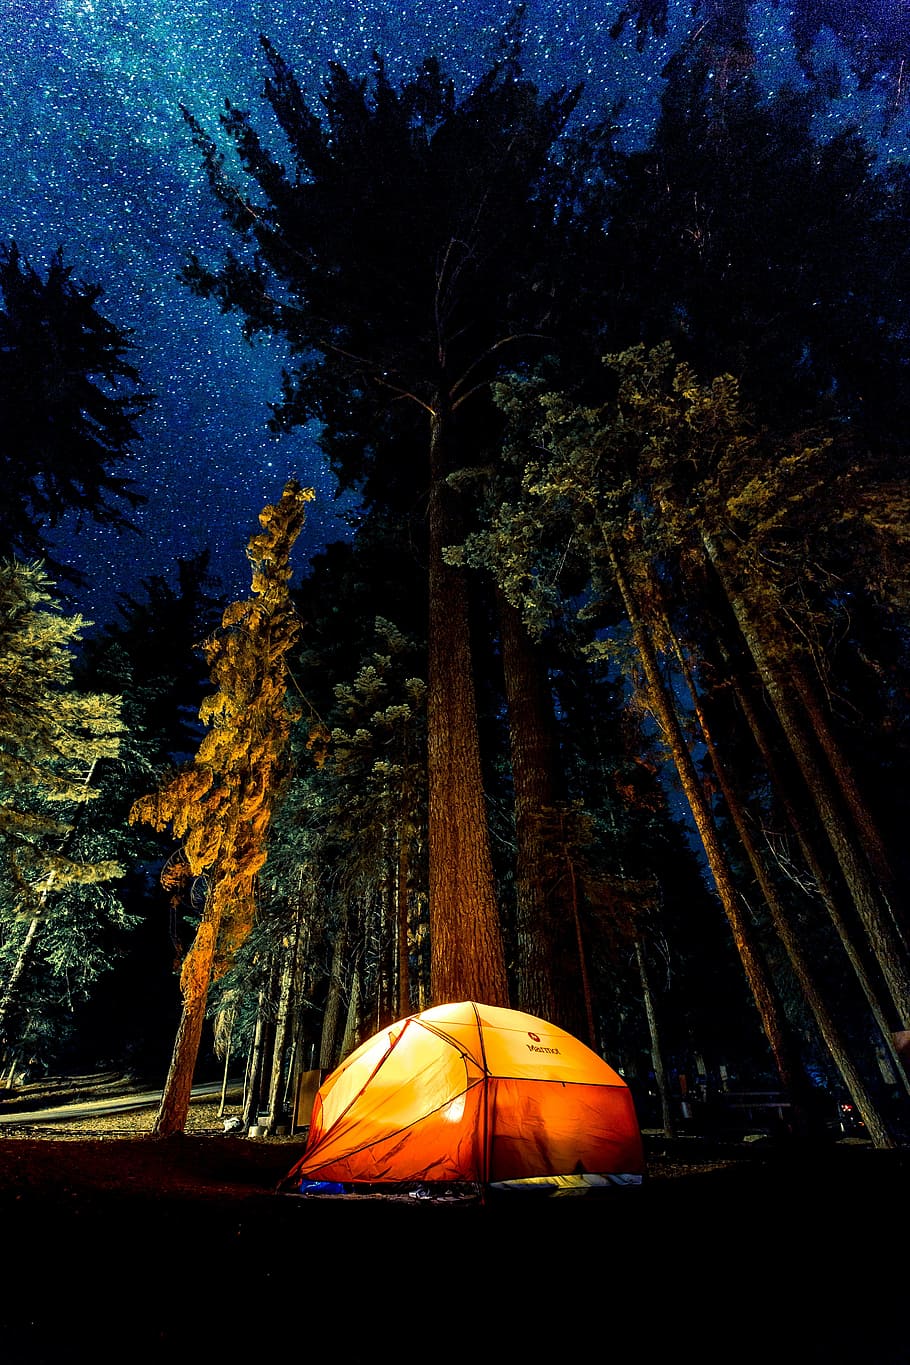 orange, yellow, tent, night sky, camping, dark, forest, light, low angle shot, outdoors